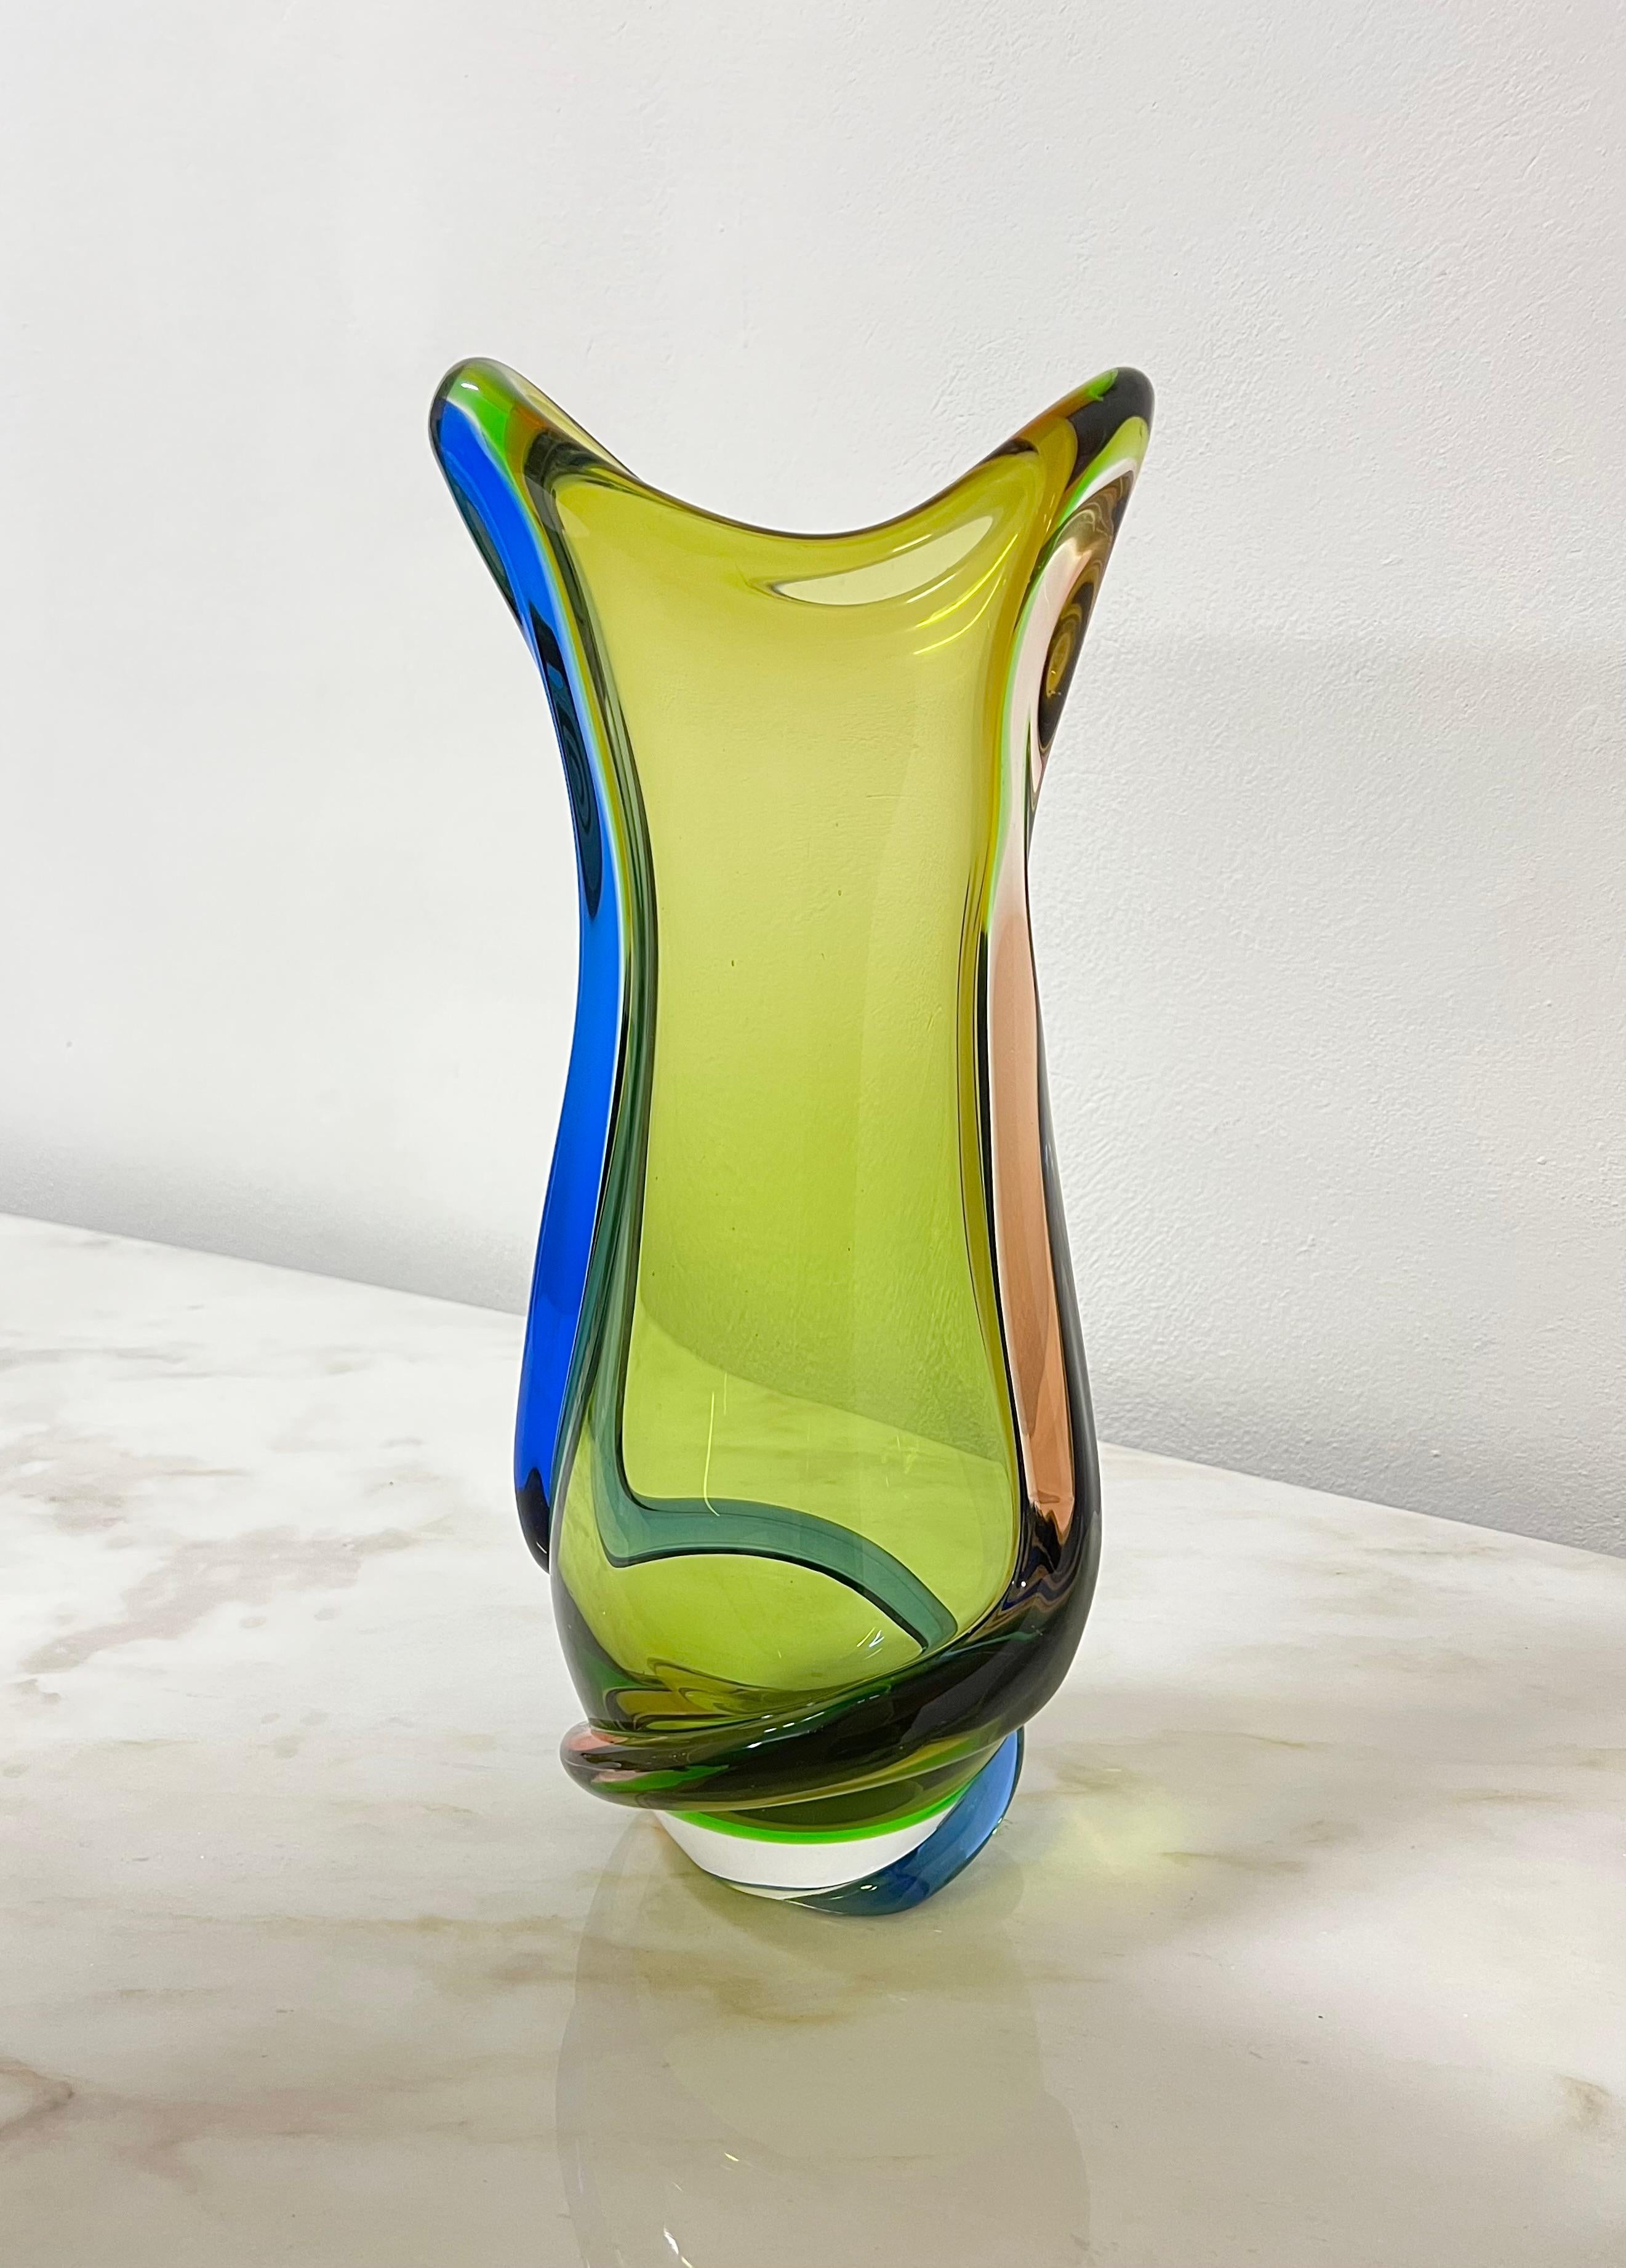 Imposing vase attributed to Flavio Poli and produced in Italy in the 70s. The vase was made of Murano glass in forest green with two cords at the extremity, one in electric blue and one in caramel, which together give the object a particular